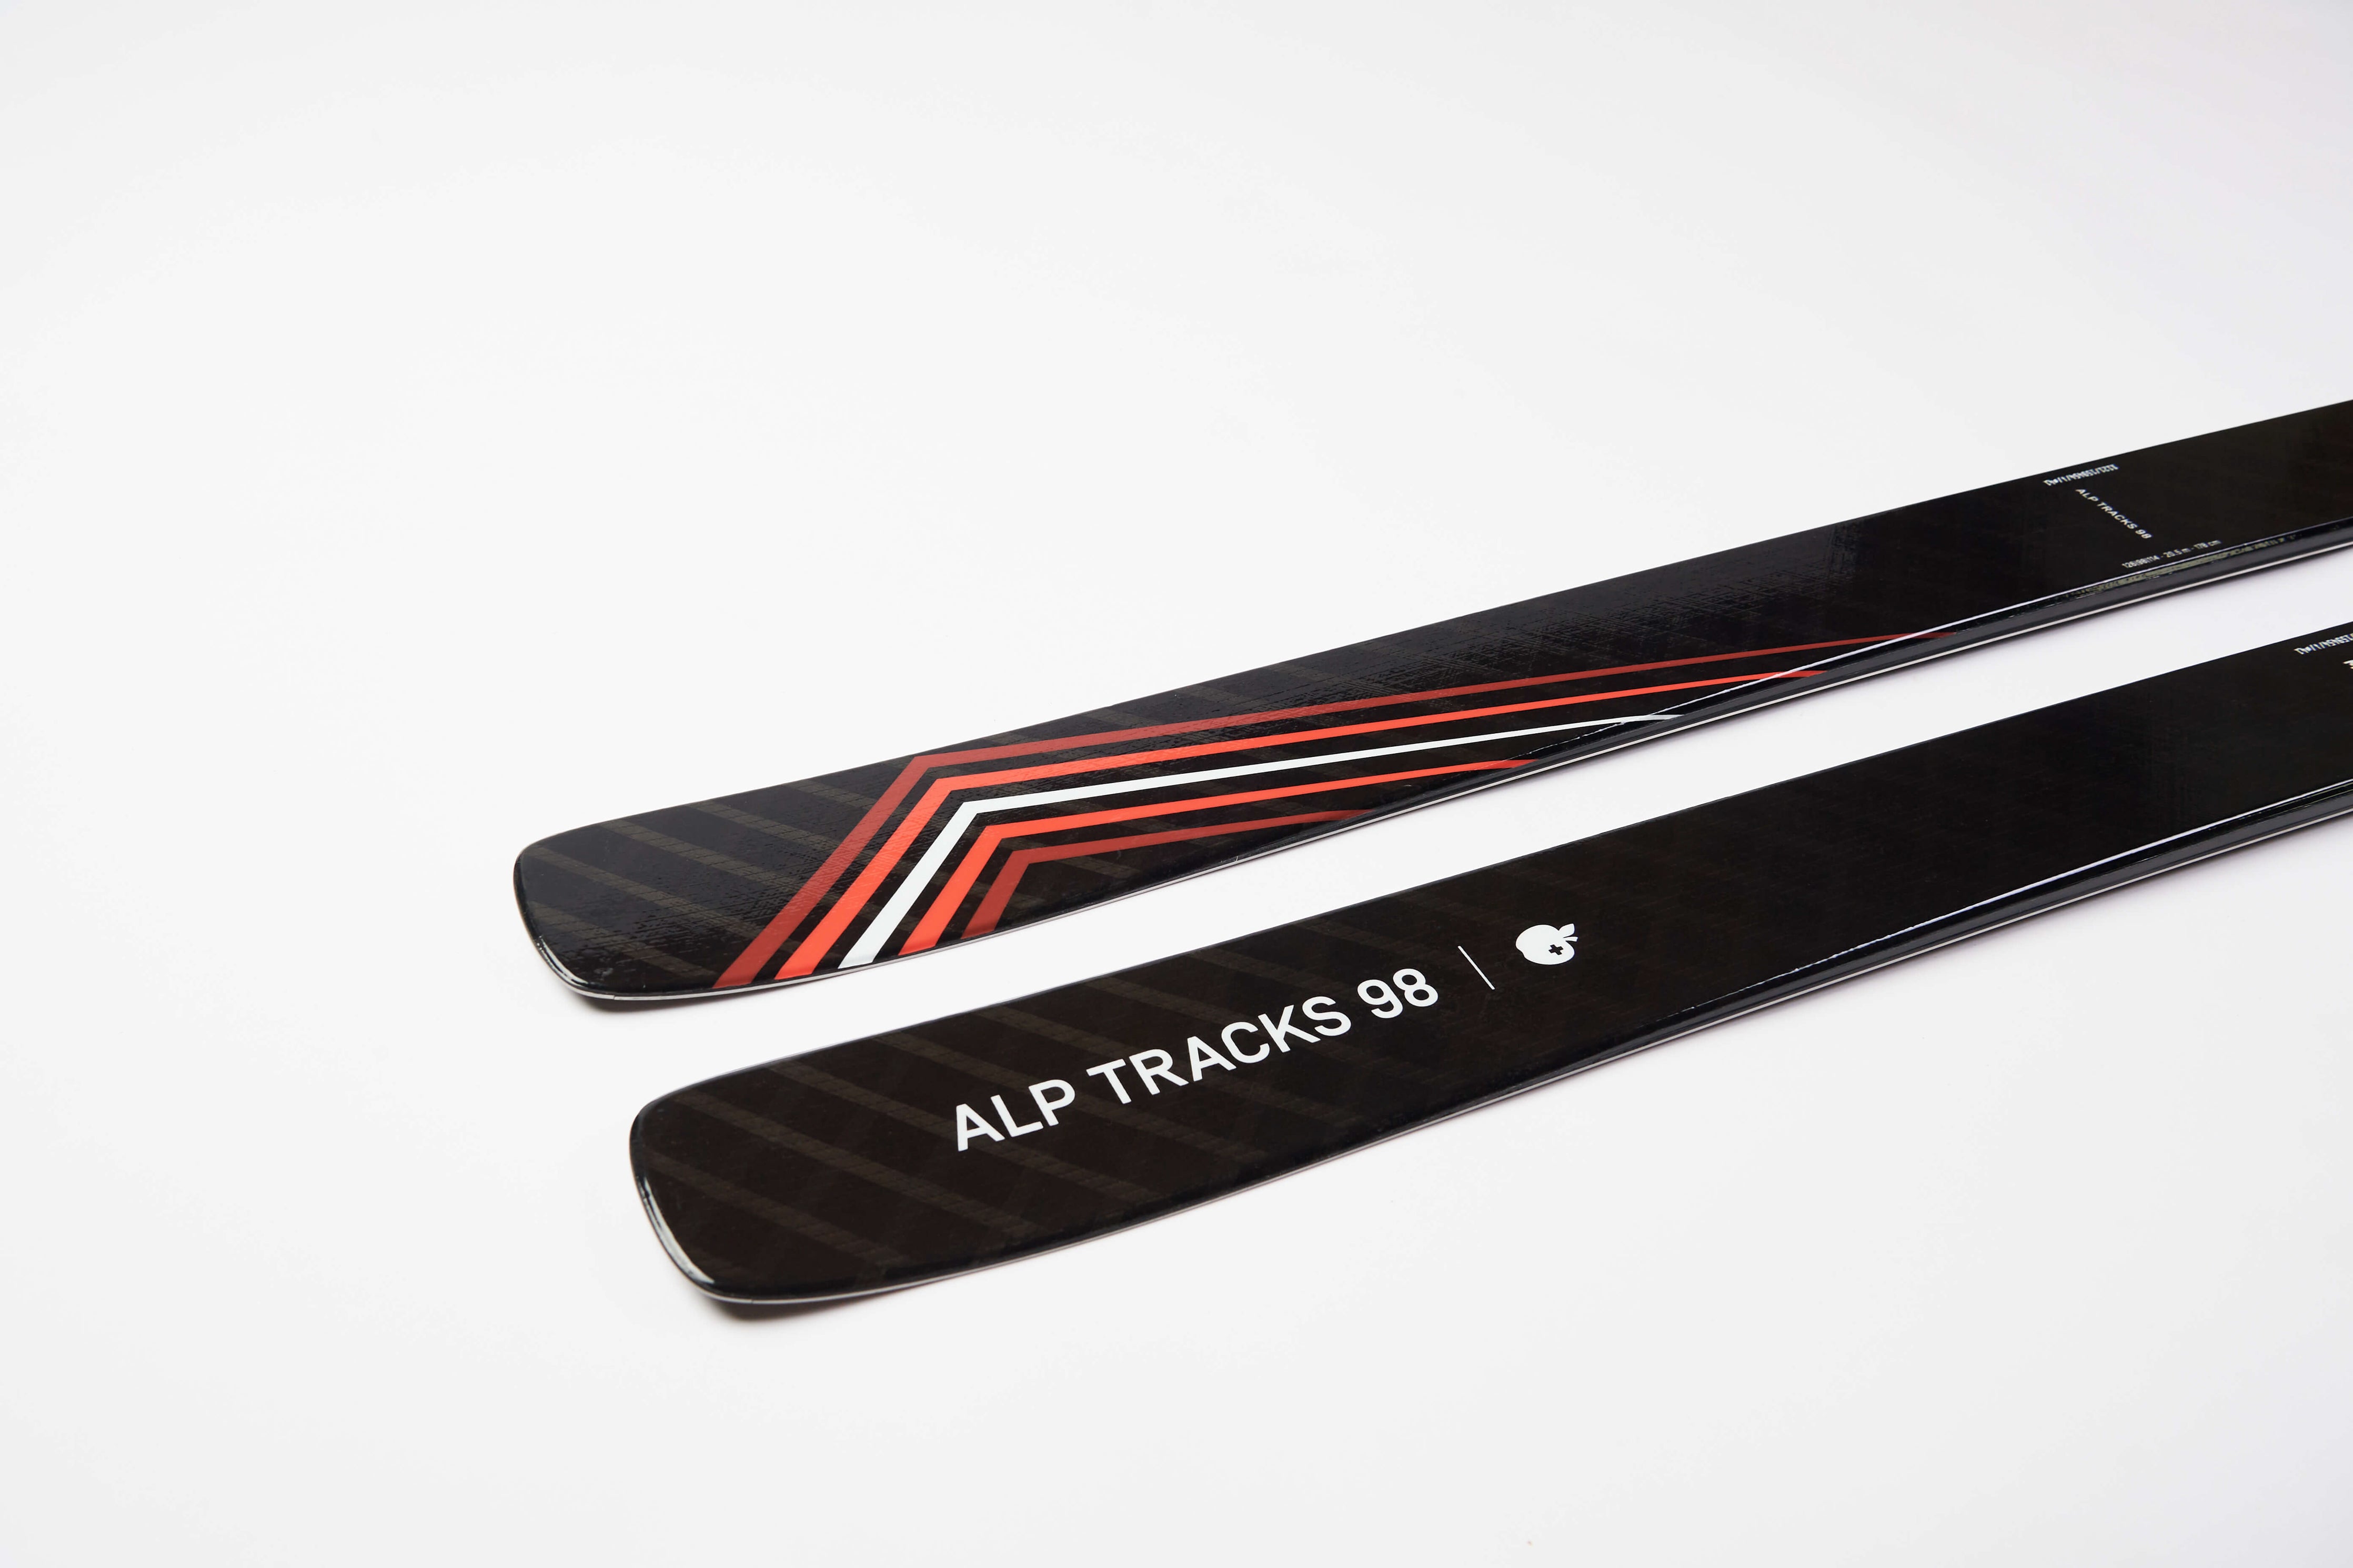 Forge my own path with Movement's Alp Tracks 98 touring skis.